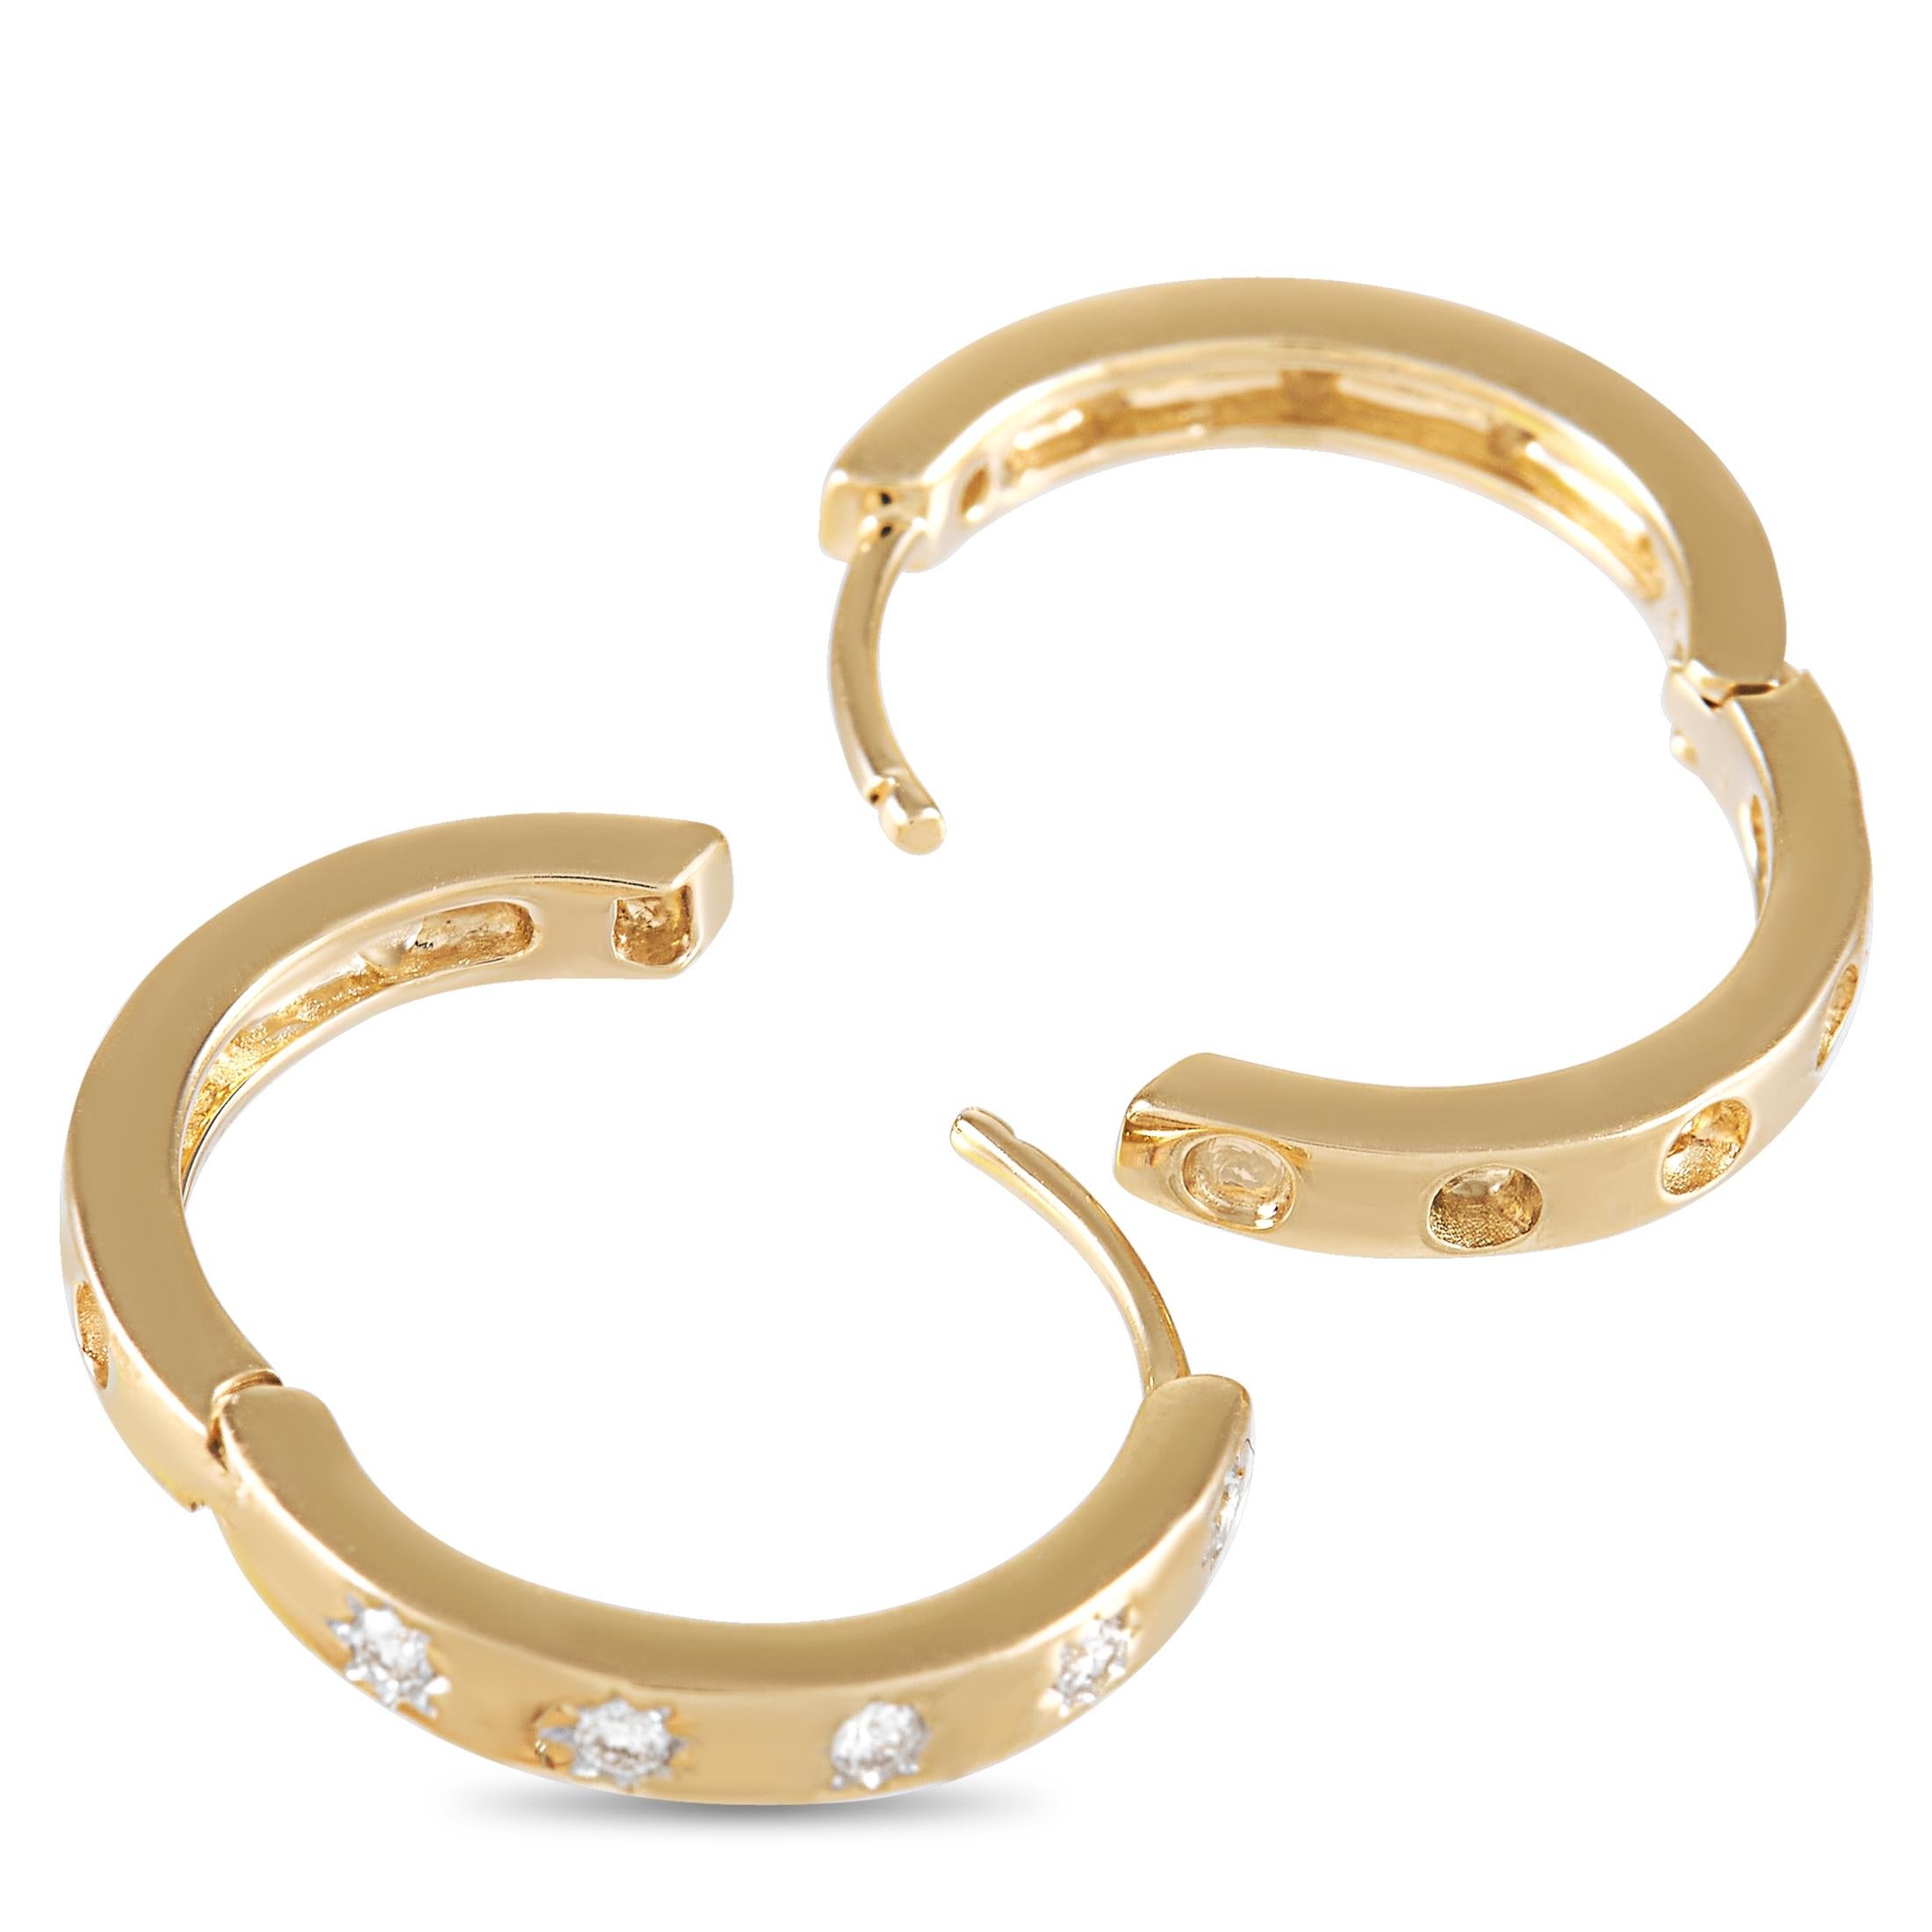 Your new wear-with-everything pair. This LB Exclusive 14K Yellow Gold 0.12ct Diamond Huggie Earrings features a pair of half-inch hoops with a hinged closure and diamond embellishment on sunray-like setting. They're in a perfect size to gently hug